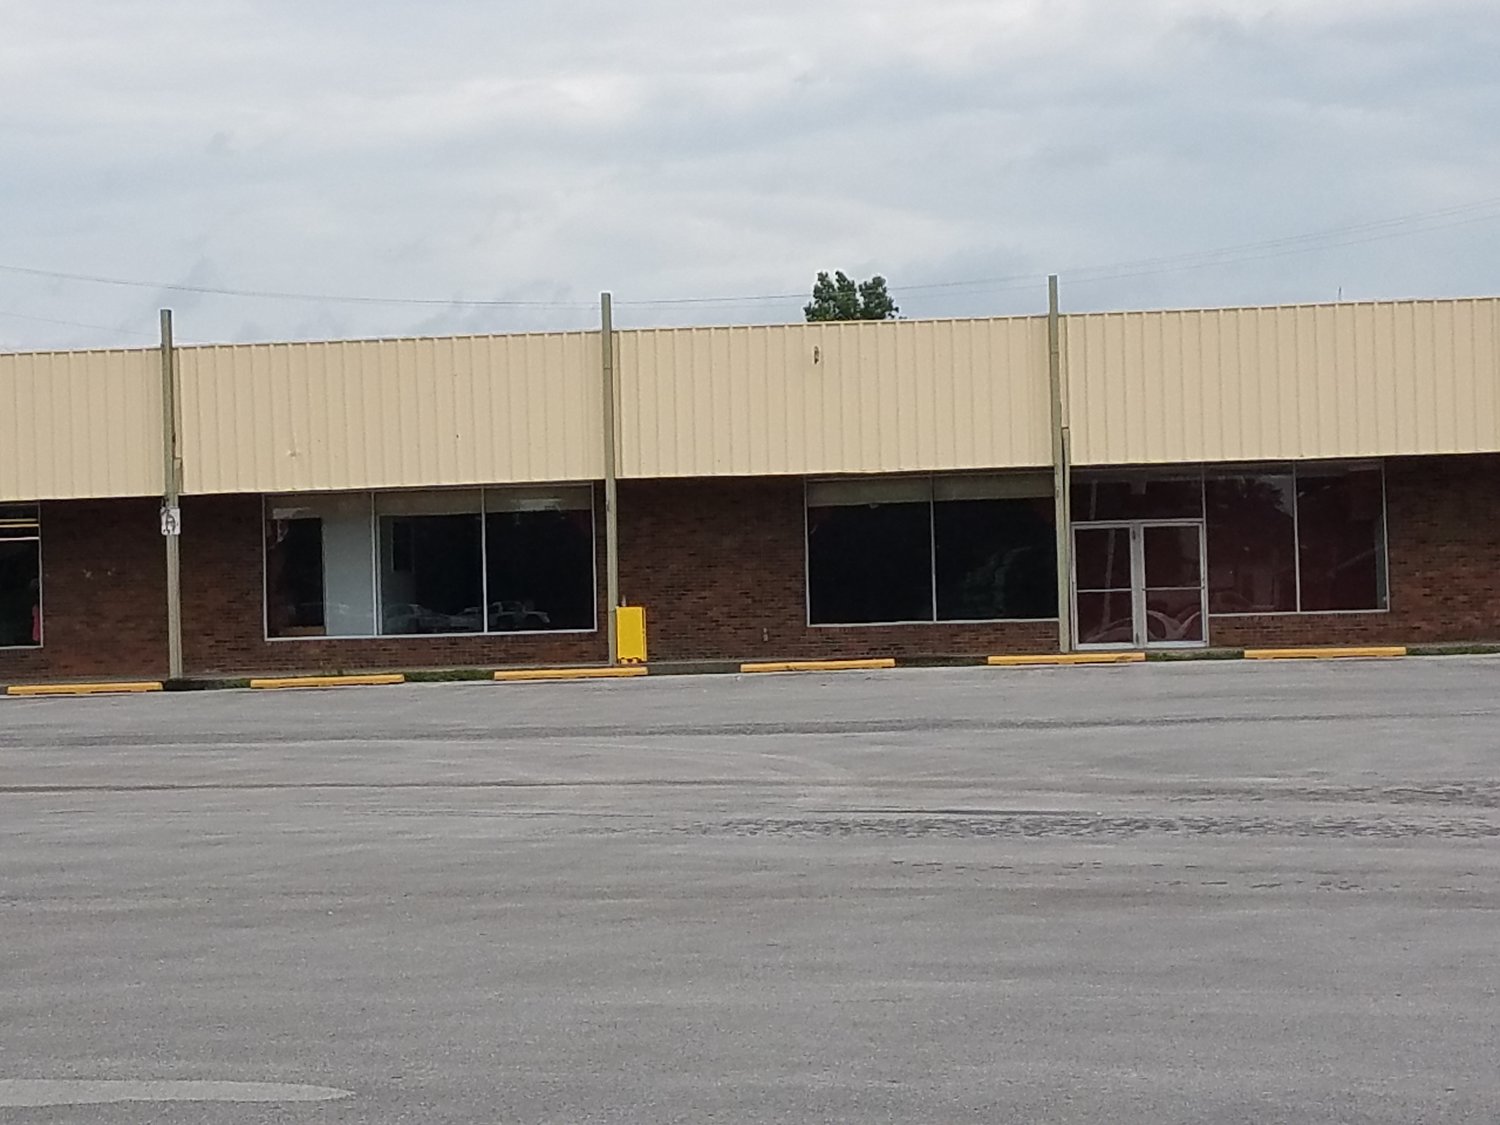 Main Photo For Commercial Storefront for Lease in Beaver Dam